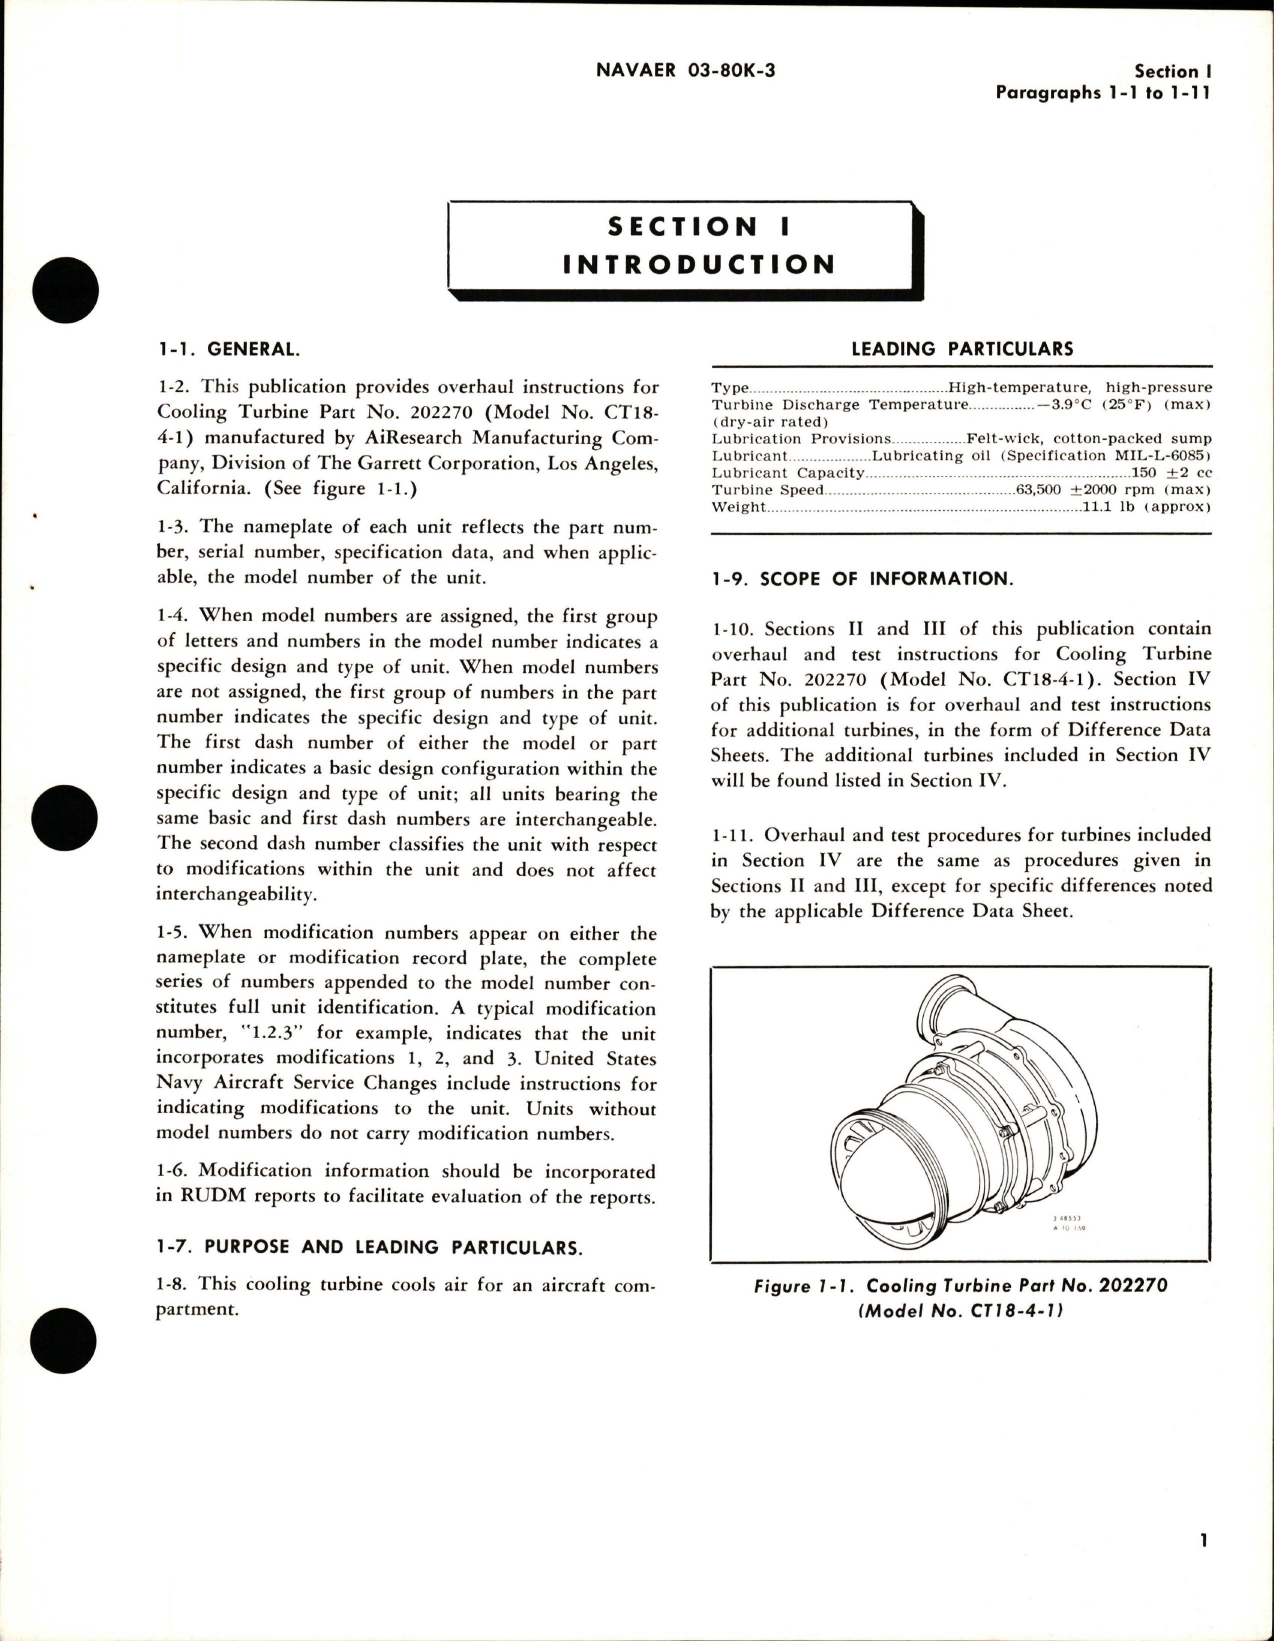 Sample page 5 from AirCorps Library document: Overhaul Instructions for Cooling Turbine - Part 202270 - Model CT18-4